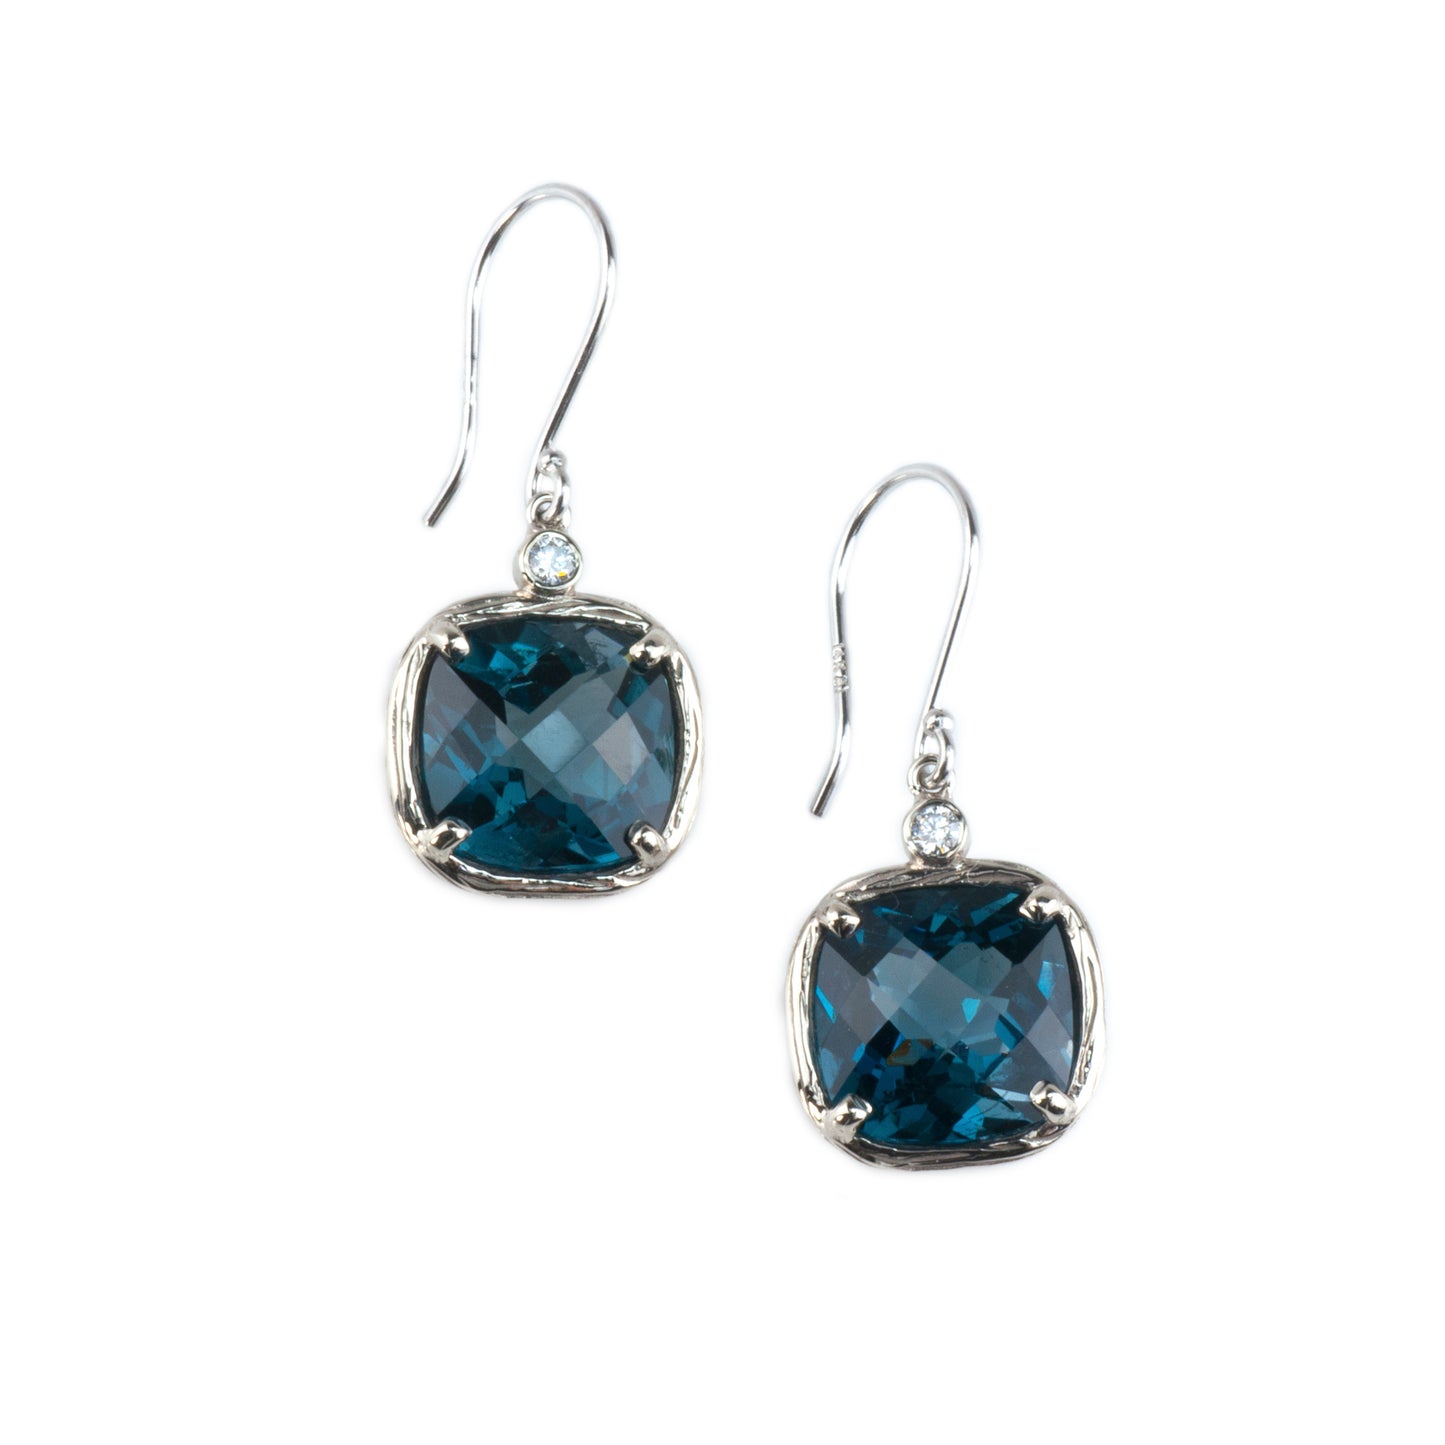 Riverbend Collection White Gold London Blue Topaz Earrings